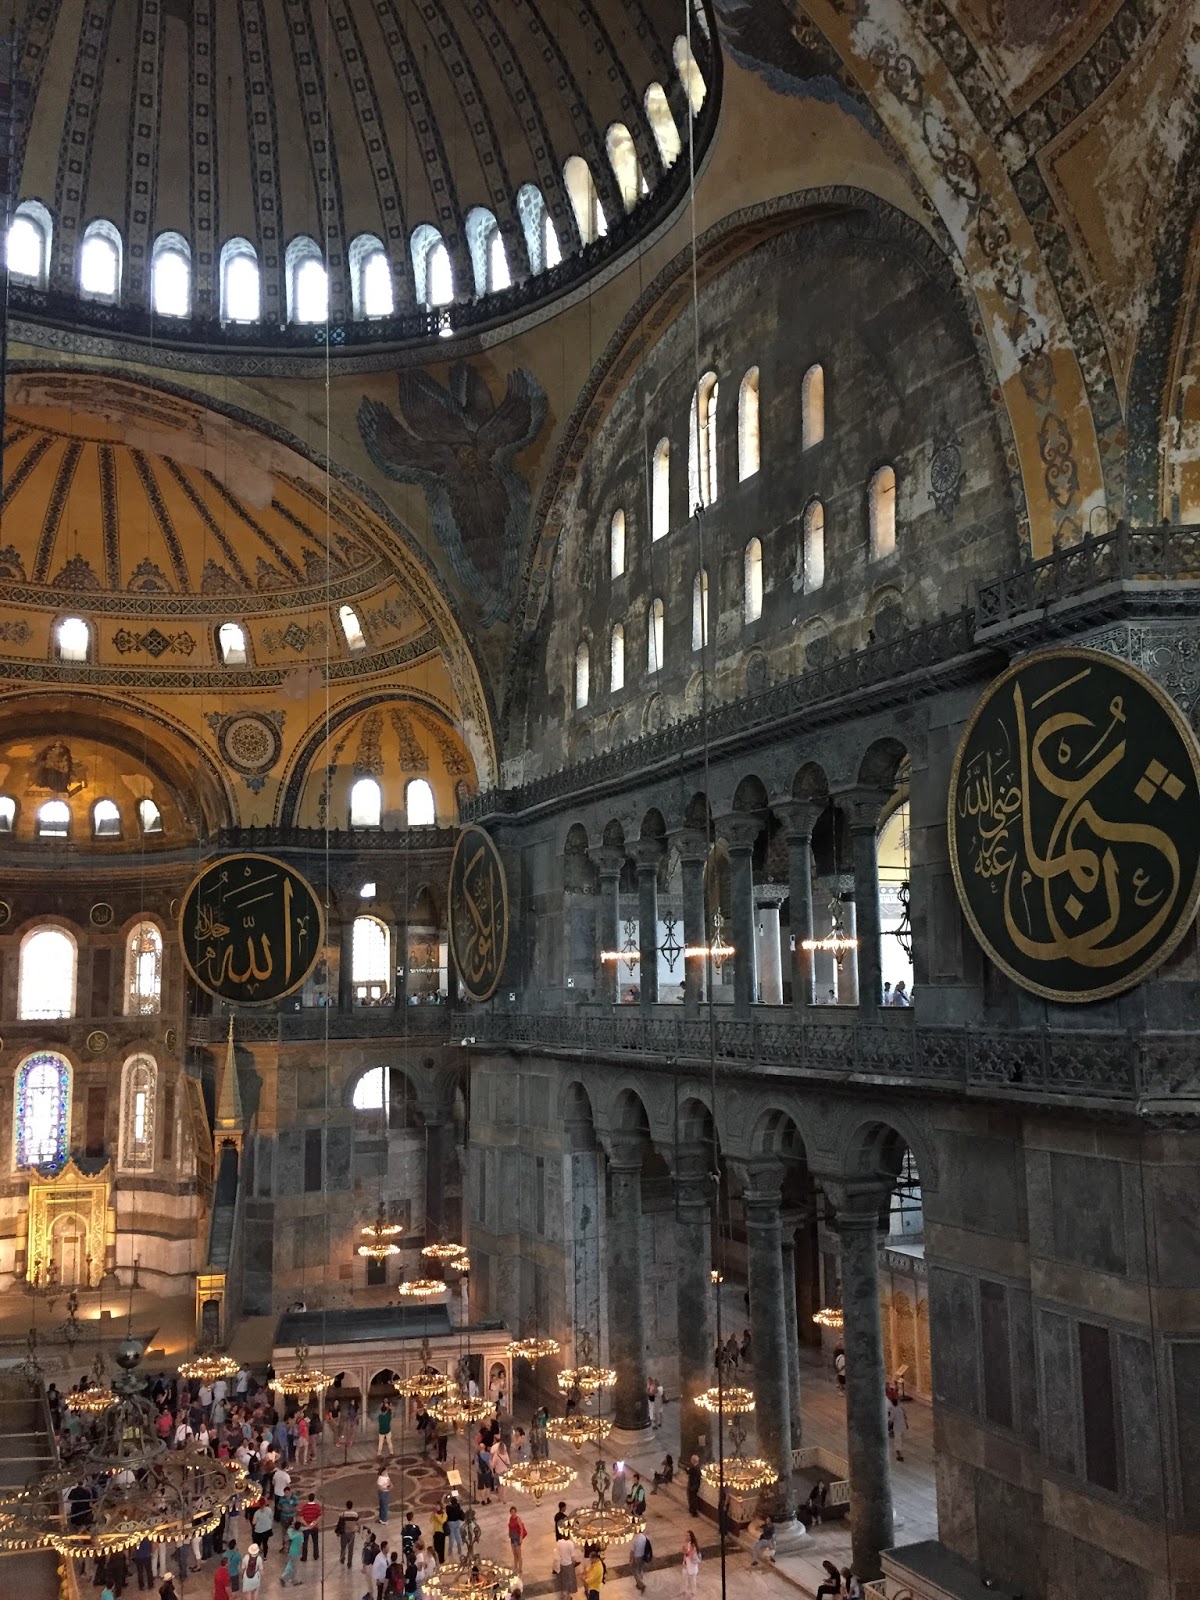 A view from above in Hagia Sophia